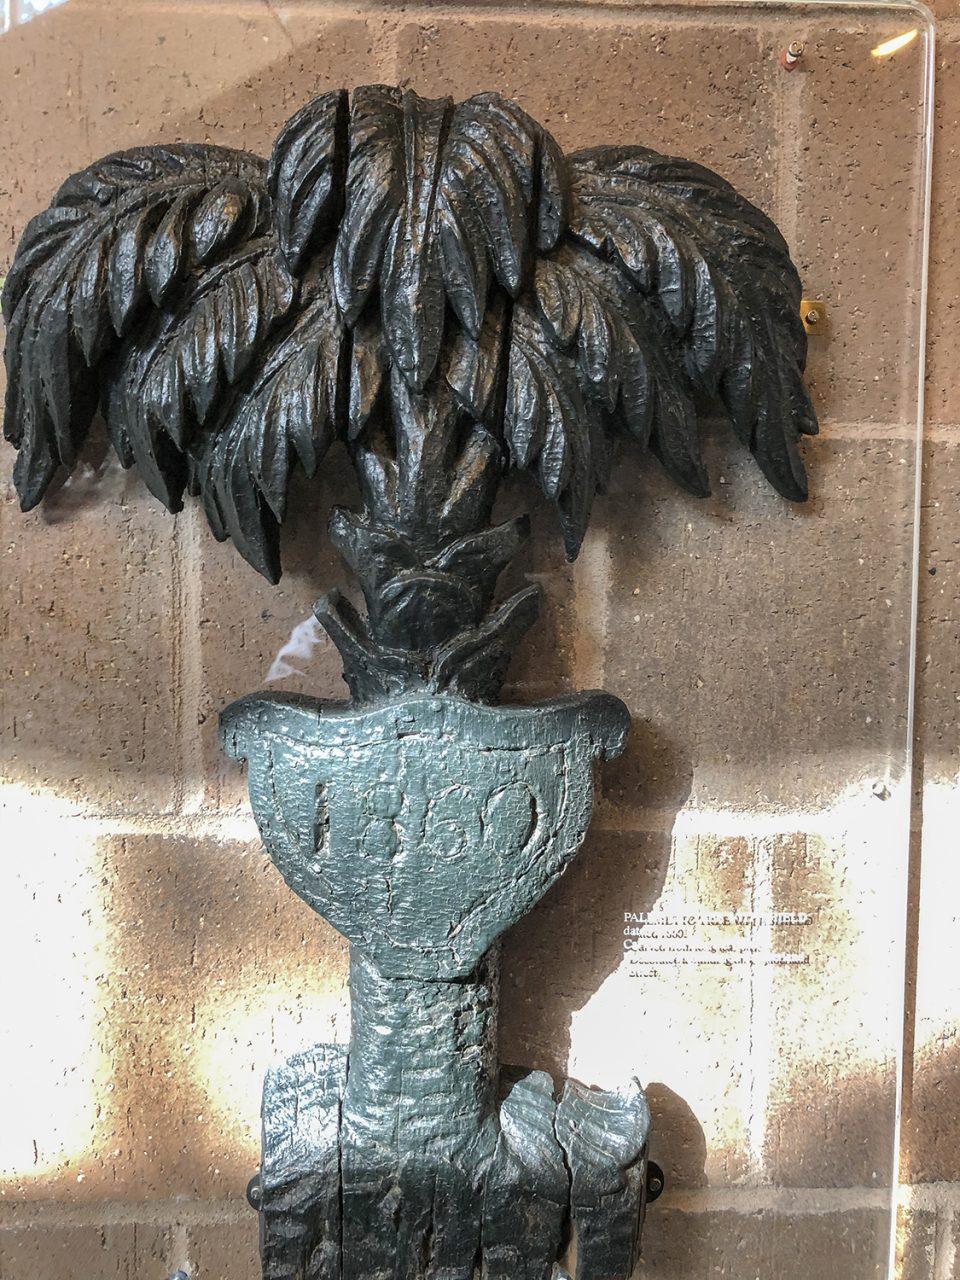 Photo of a cast iron palm tree with a shield dated 1860, as seen in the Charleston Museum.